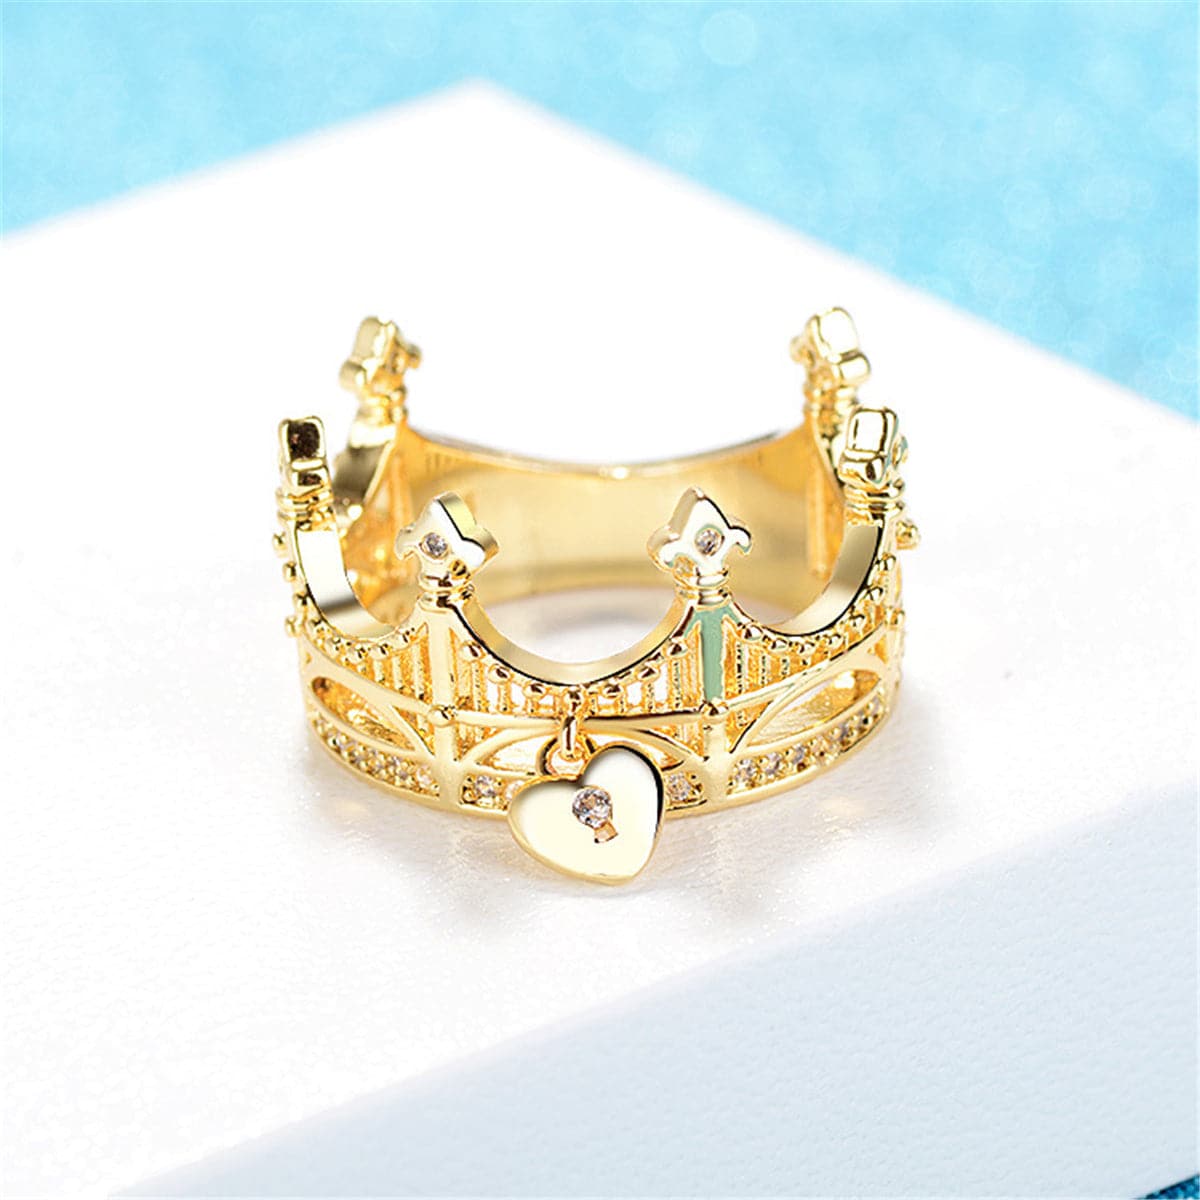 Cubic Zirconia & 18K Gold-Plated Heart Charm Crown Ring